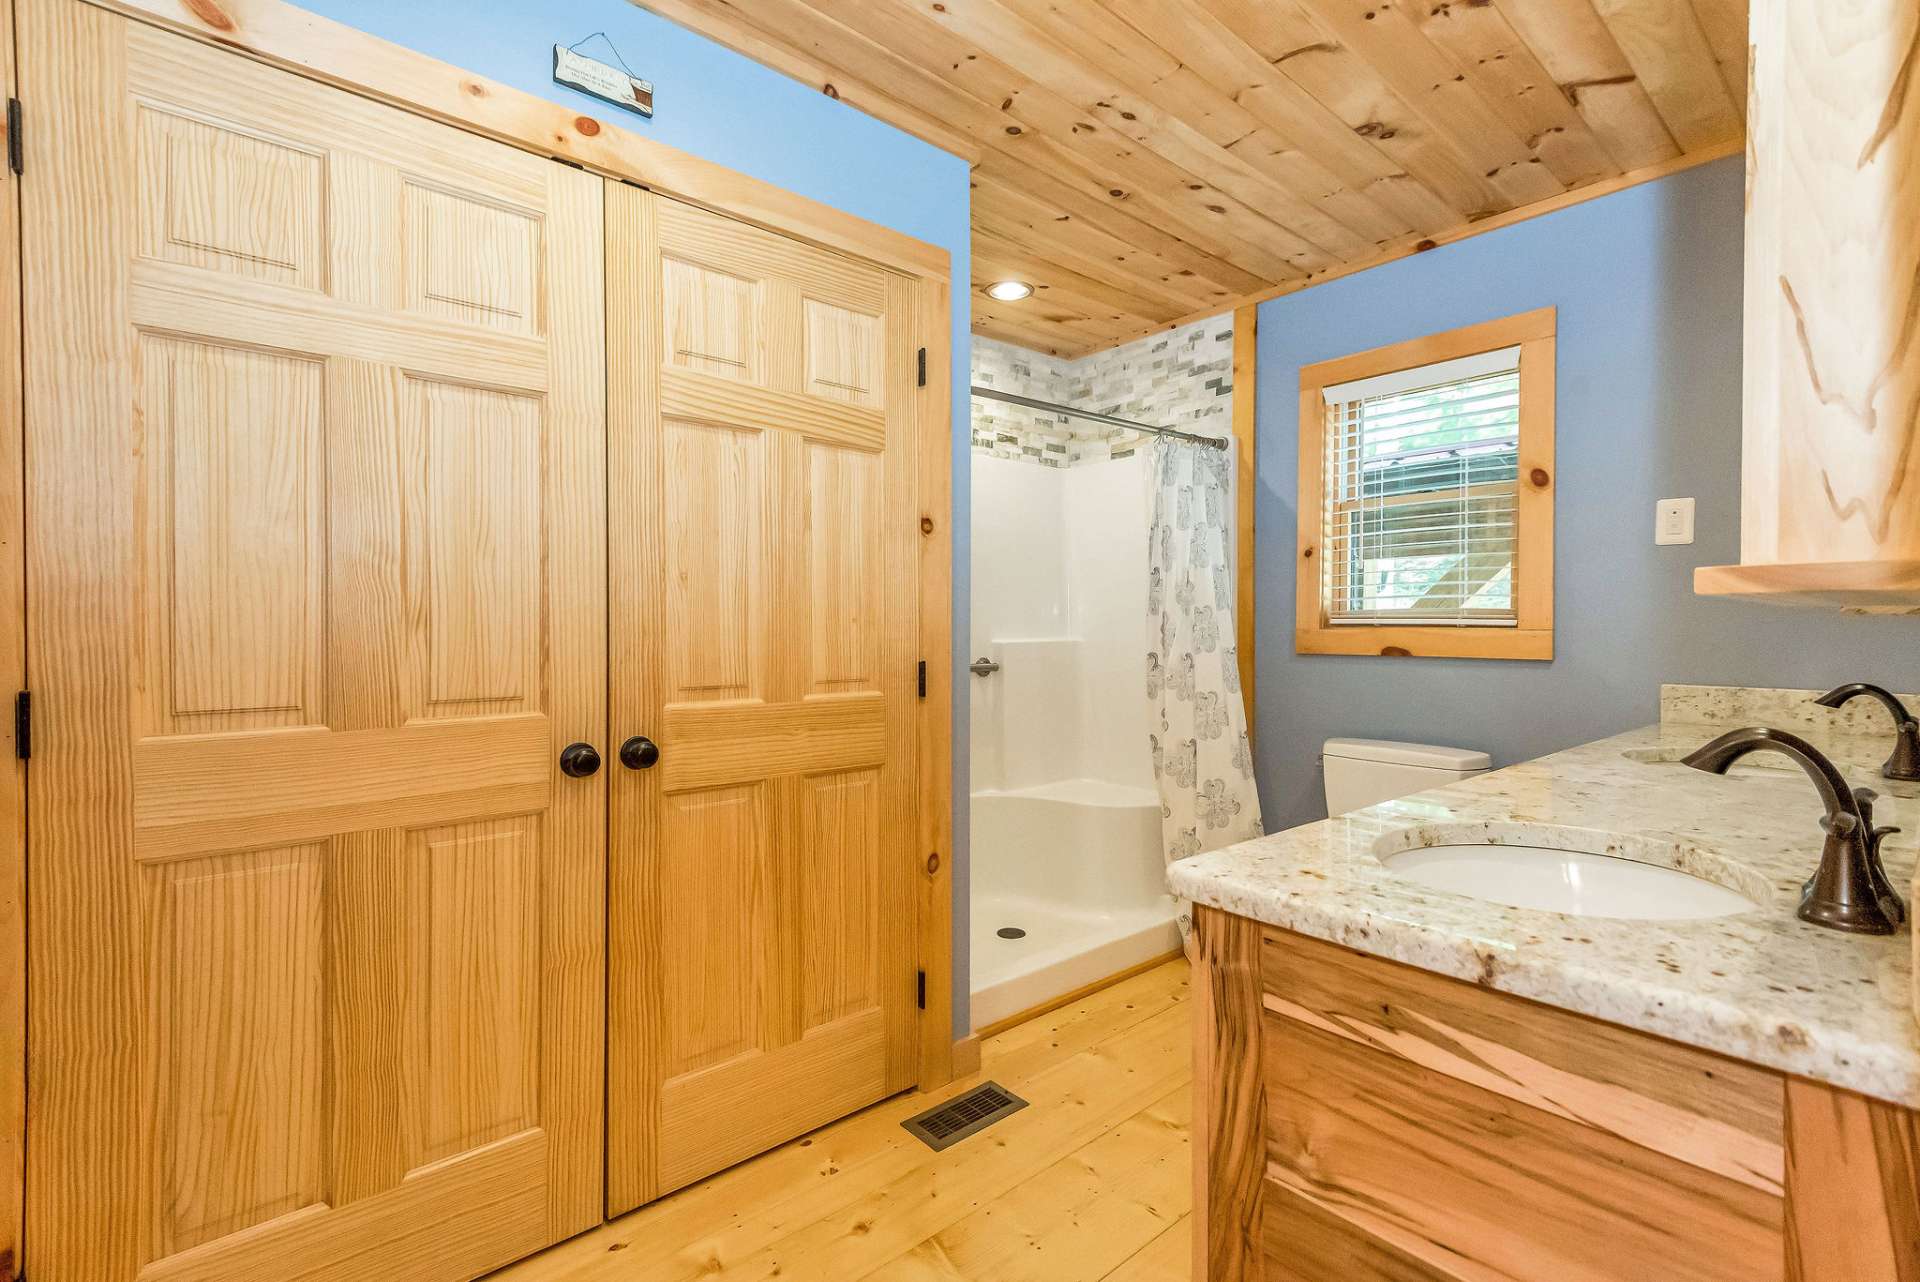 The main level bath features a laundry closet and walk in shower with seating.